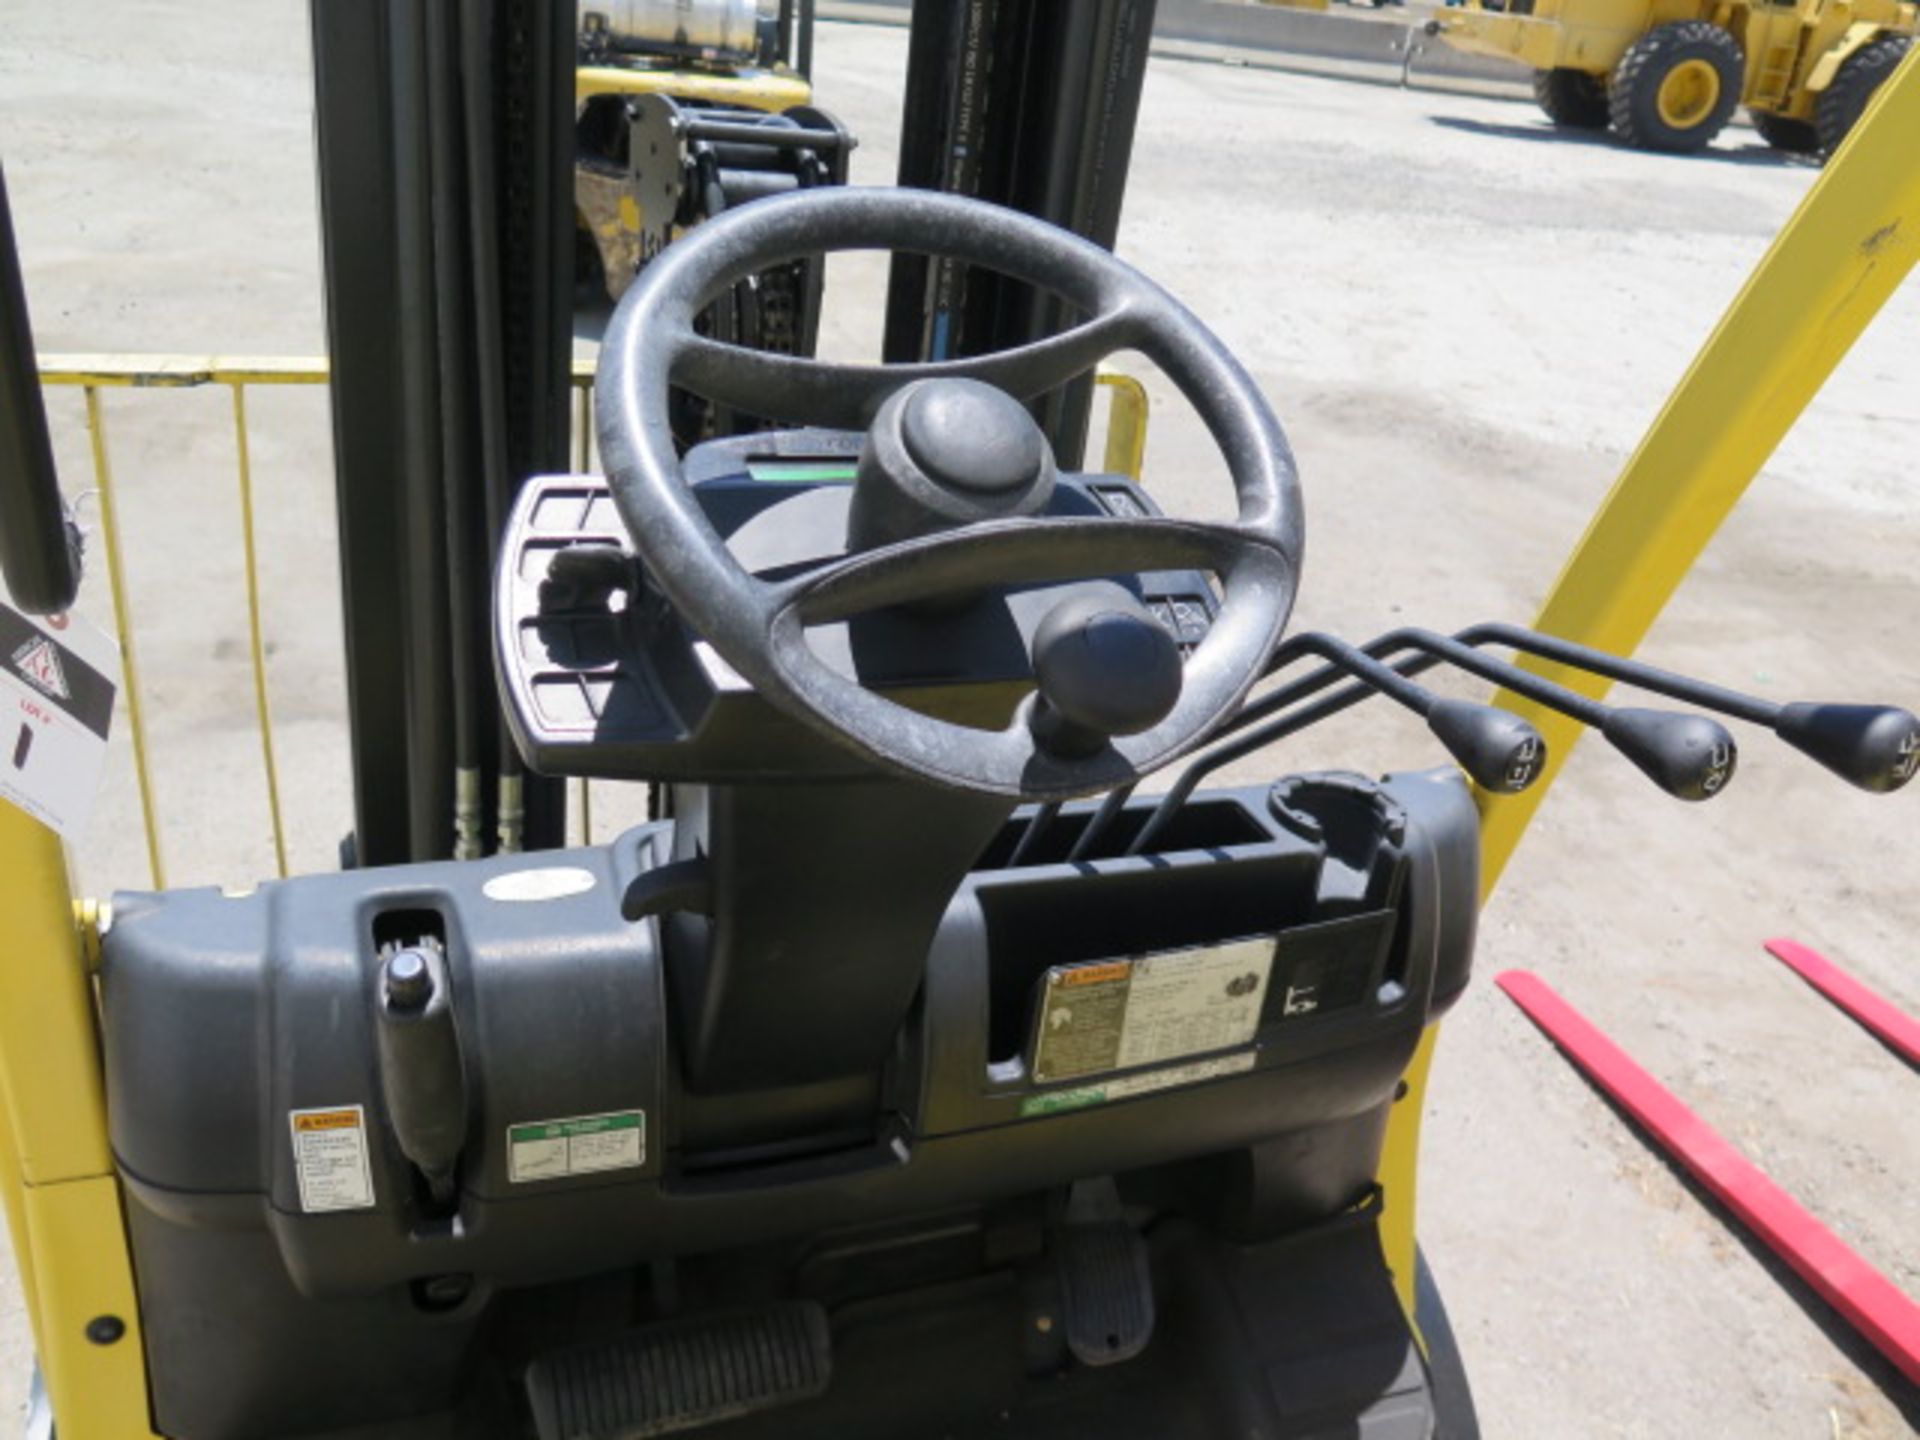 2017 Hyster H50FT 5000 Lb LPG Forklift s/n P177V06250 w/ 3-Stage,189” Lift, Side Shift, SOLD AS IS - Image 13 of 22